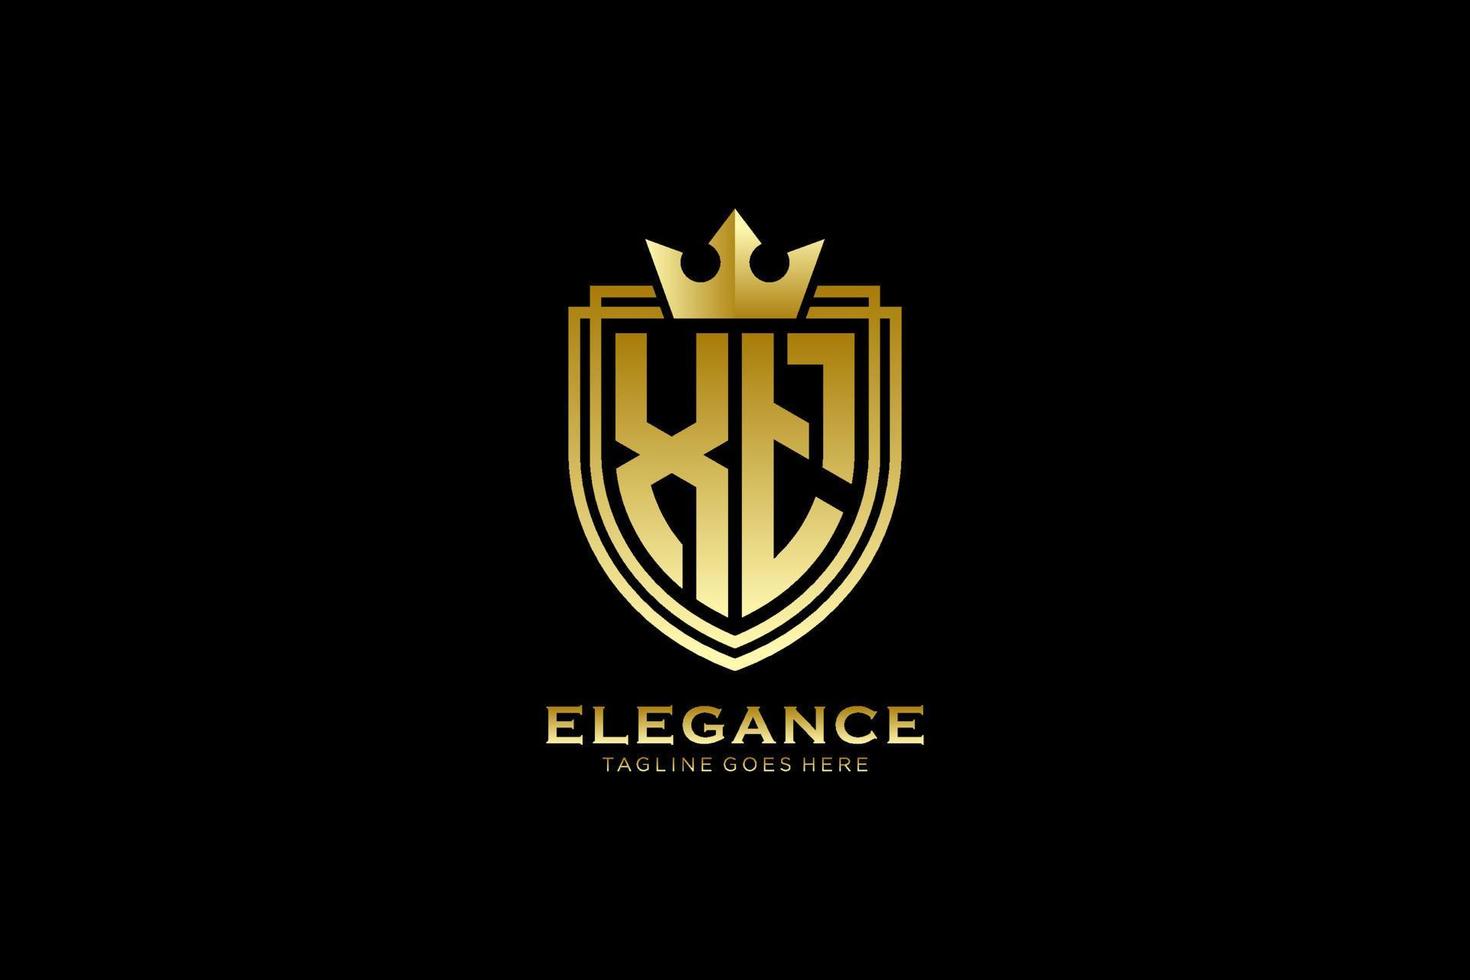 initial XT elegant luxury monogram logo or badge template with scrolls and royal crown - perfect for luxurious branding projects vector